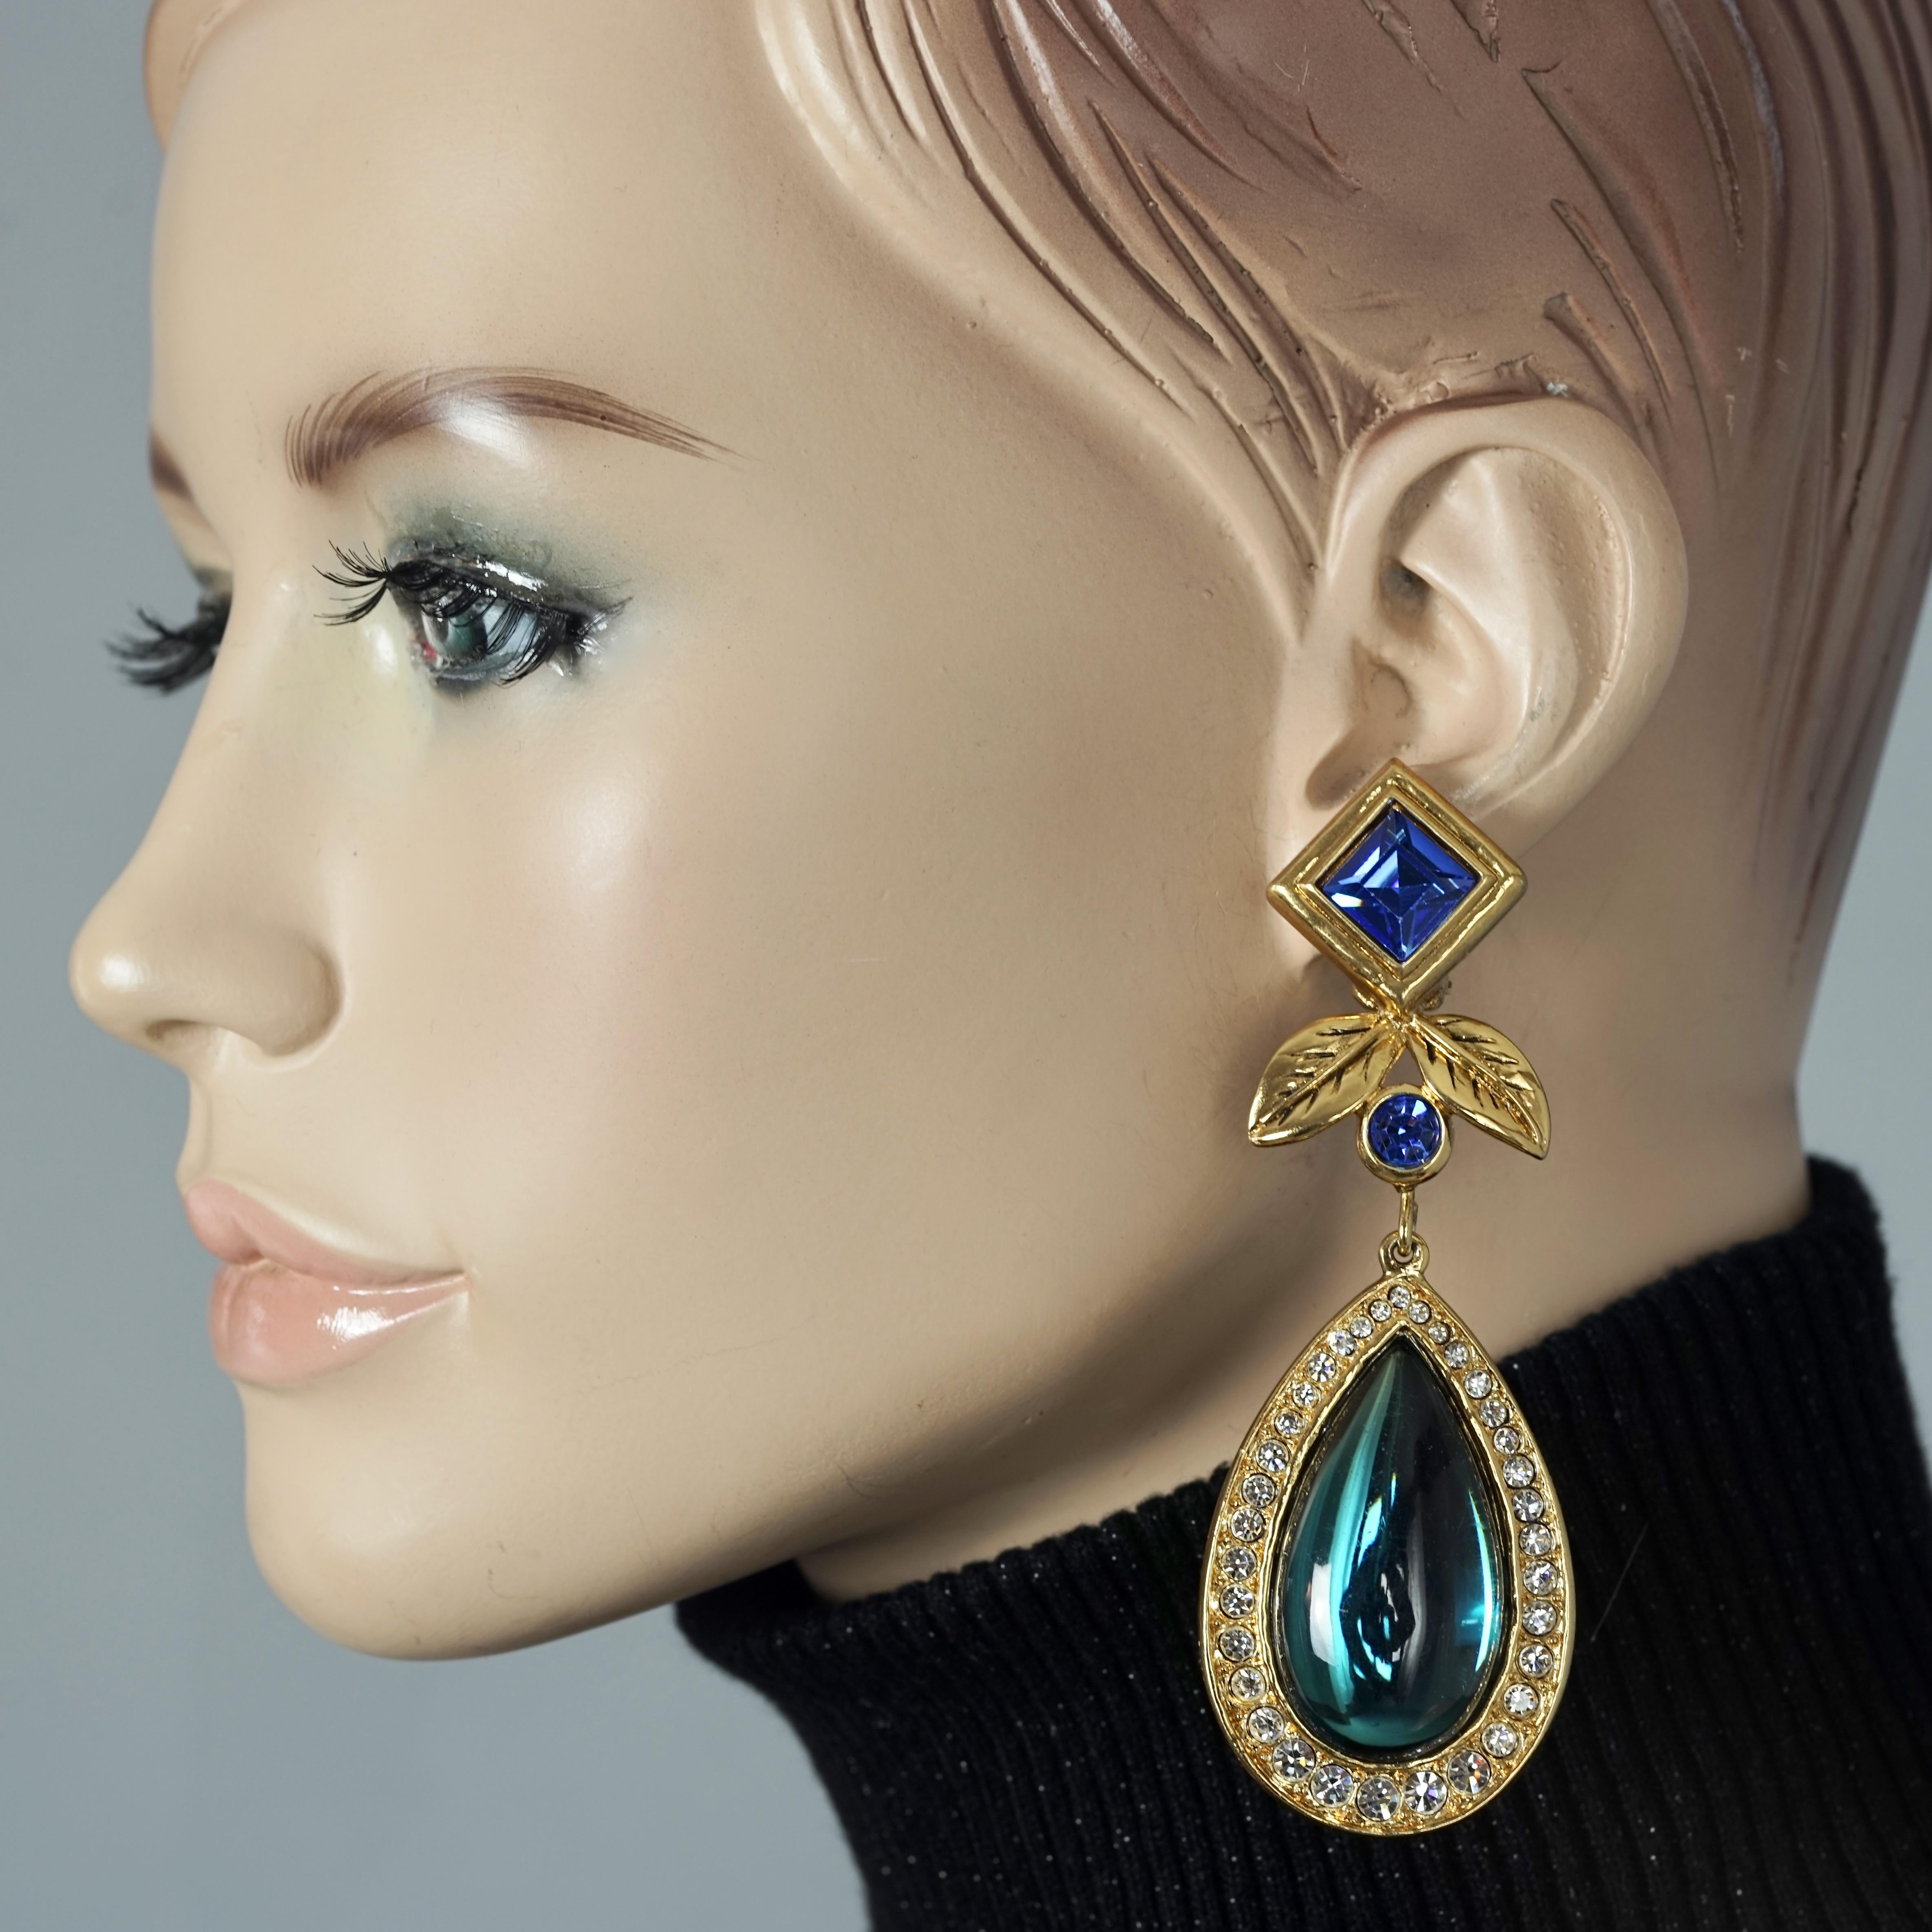 Vintage JEAN LOUIS SCHERRER Geometric Jeweled Drop Earrings

Measurements:
Height: 3.81 inches (9.7 cm)
Width: 1.33 inches (3.4 cm)
Weight per Earring: 36 grams

Features:
- 100% Authentic JEAN LOUIS SCHERRER.
- Massive and long geometric jeweled